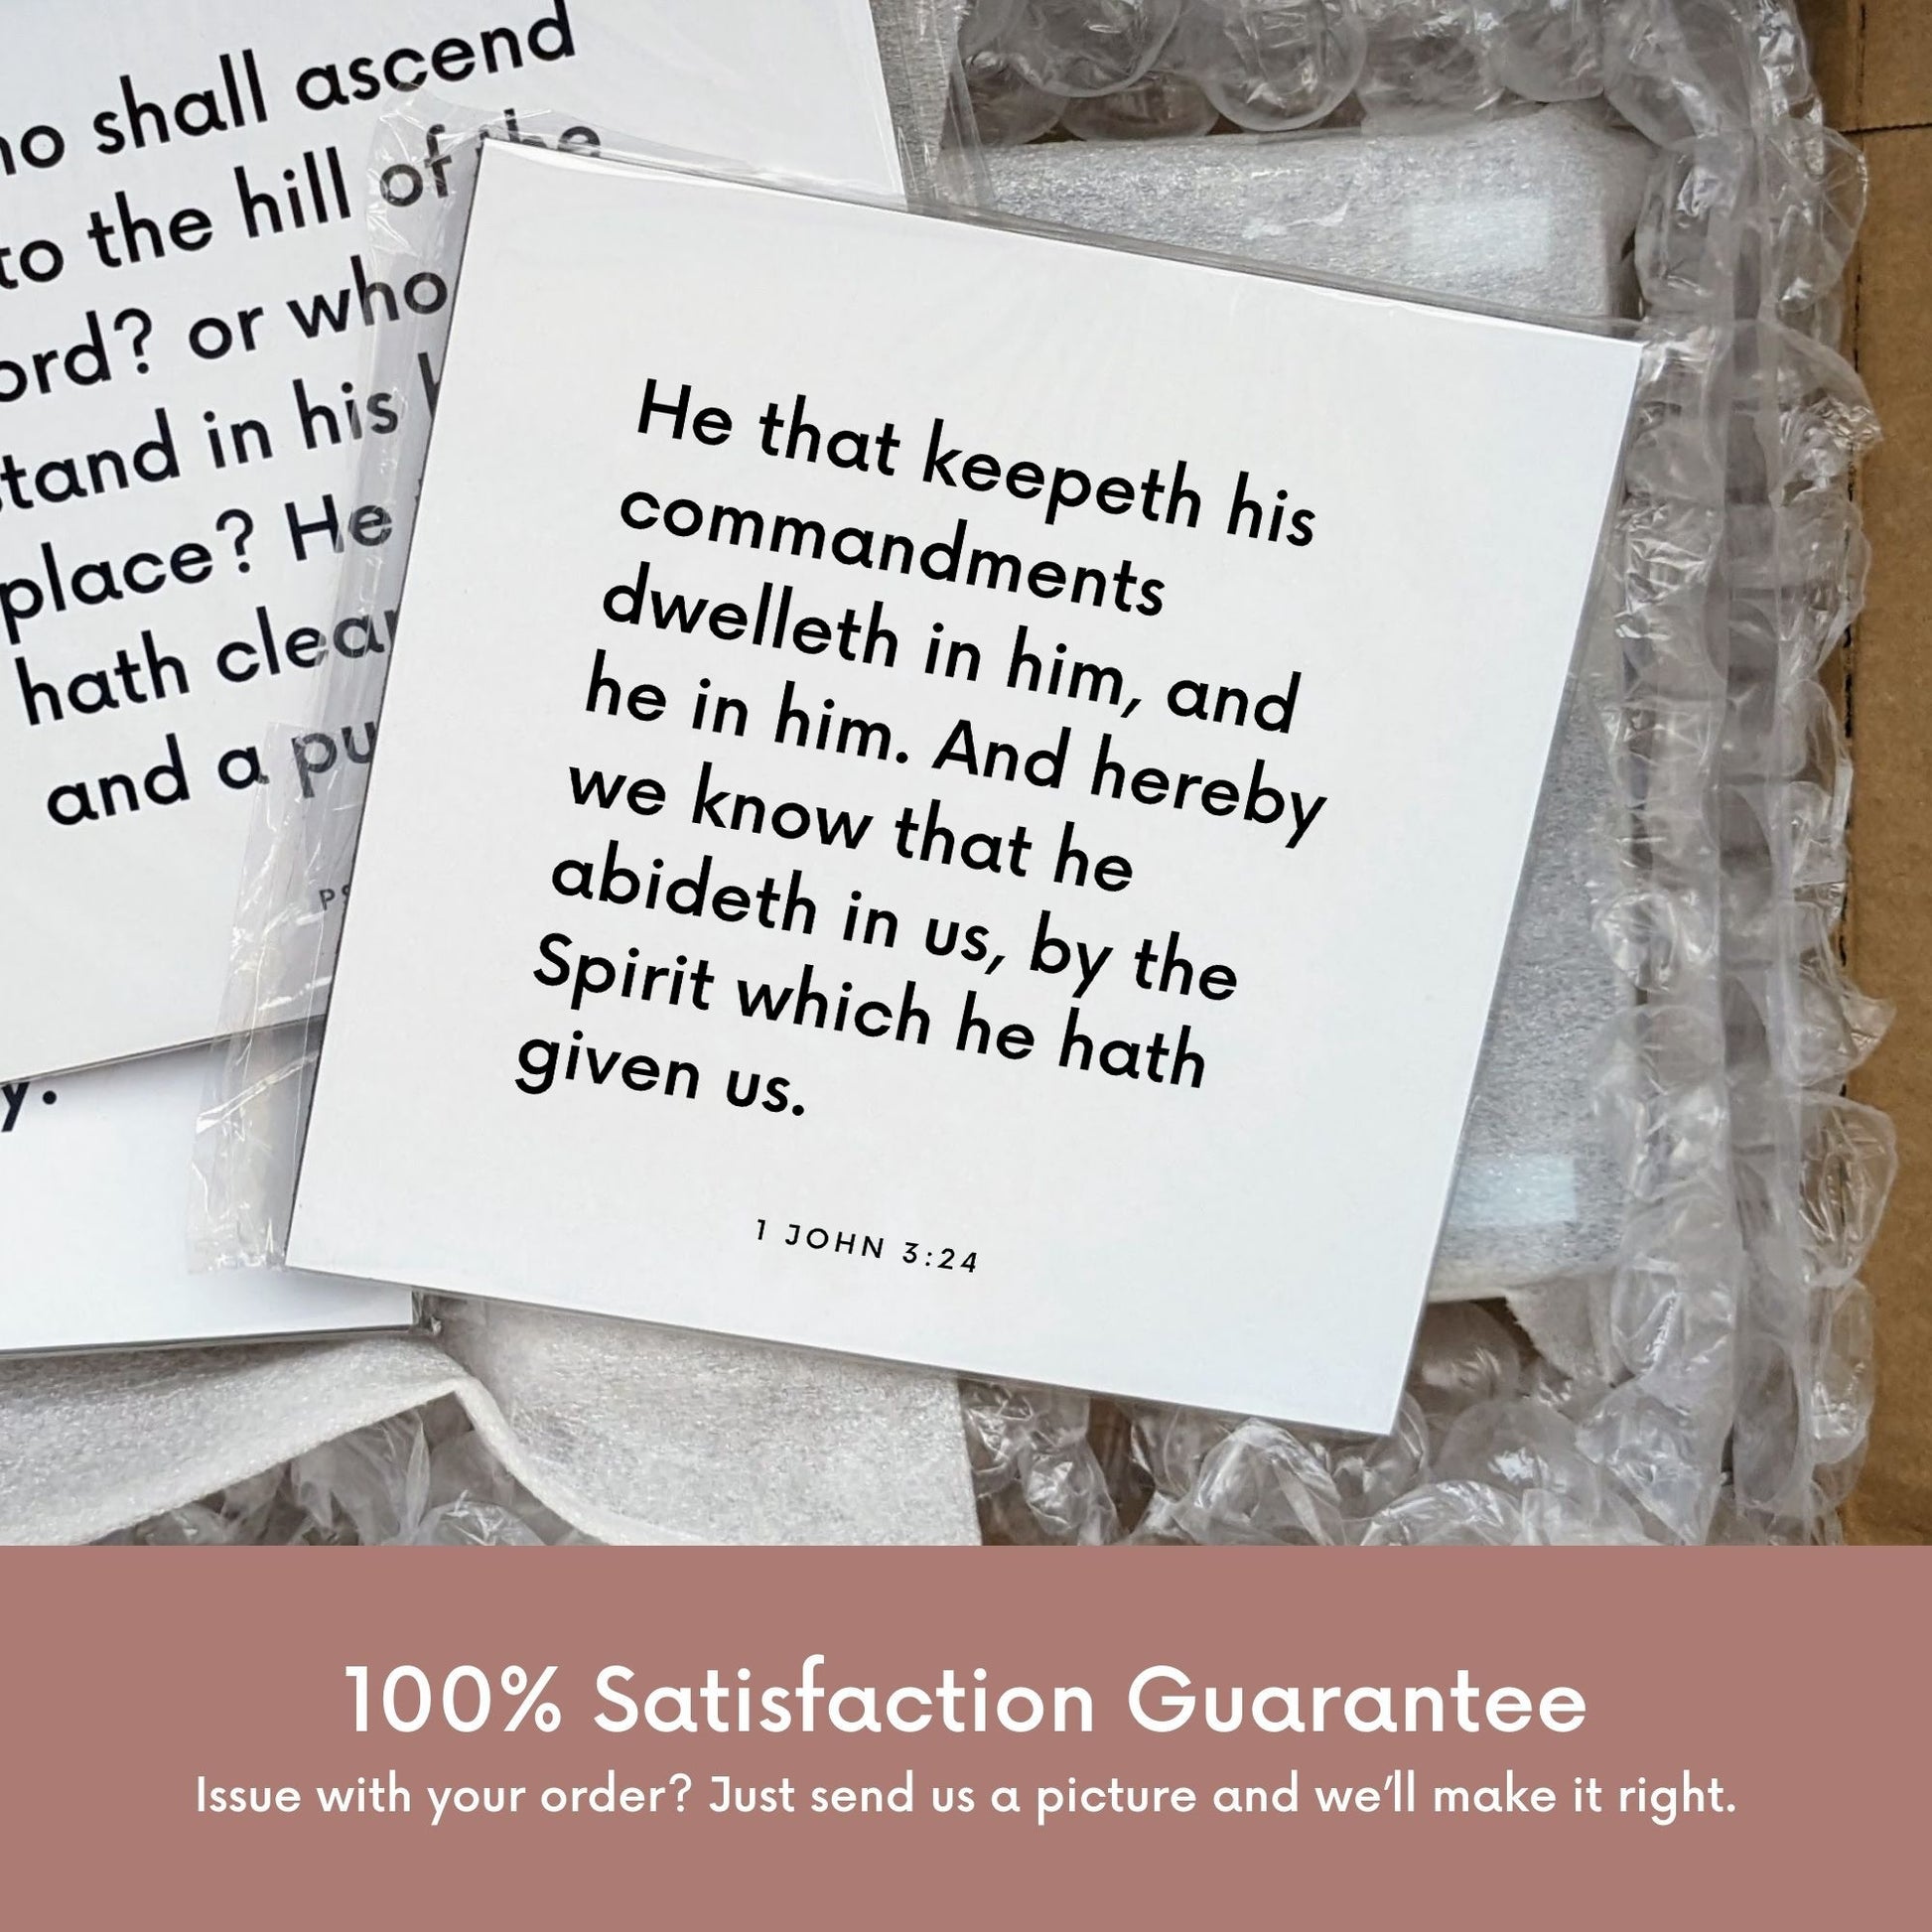 Shipping materials for scripture tile of 1 John 3:24 - "He that keepeth his commandments dwelleth in him"